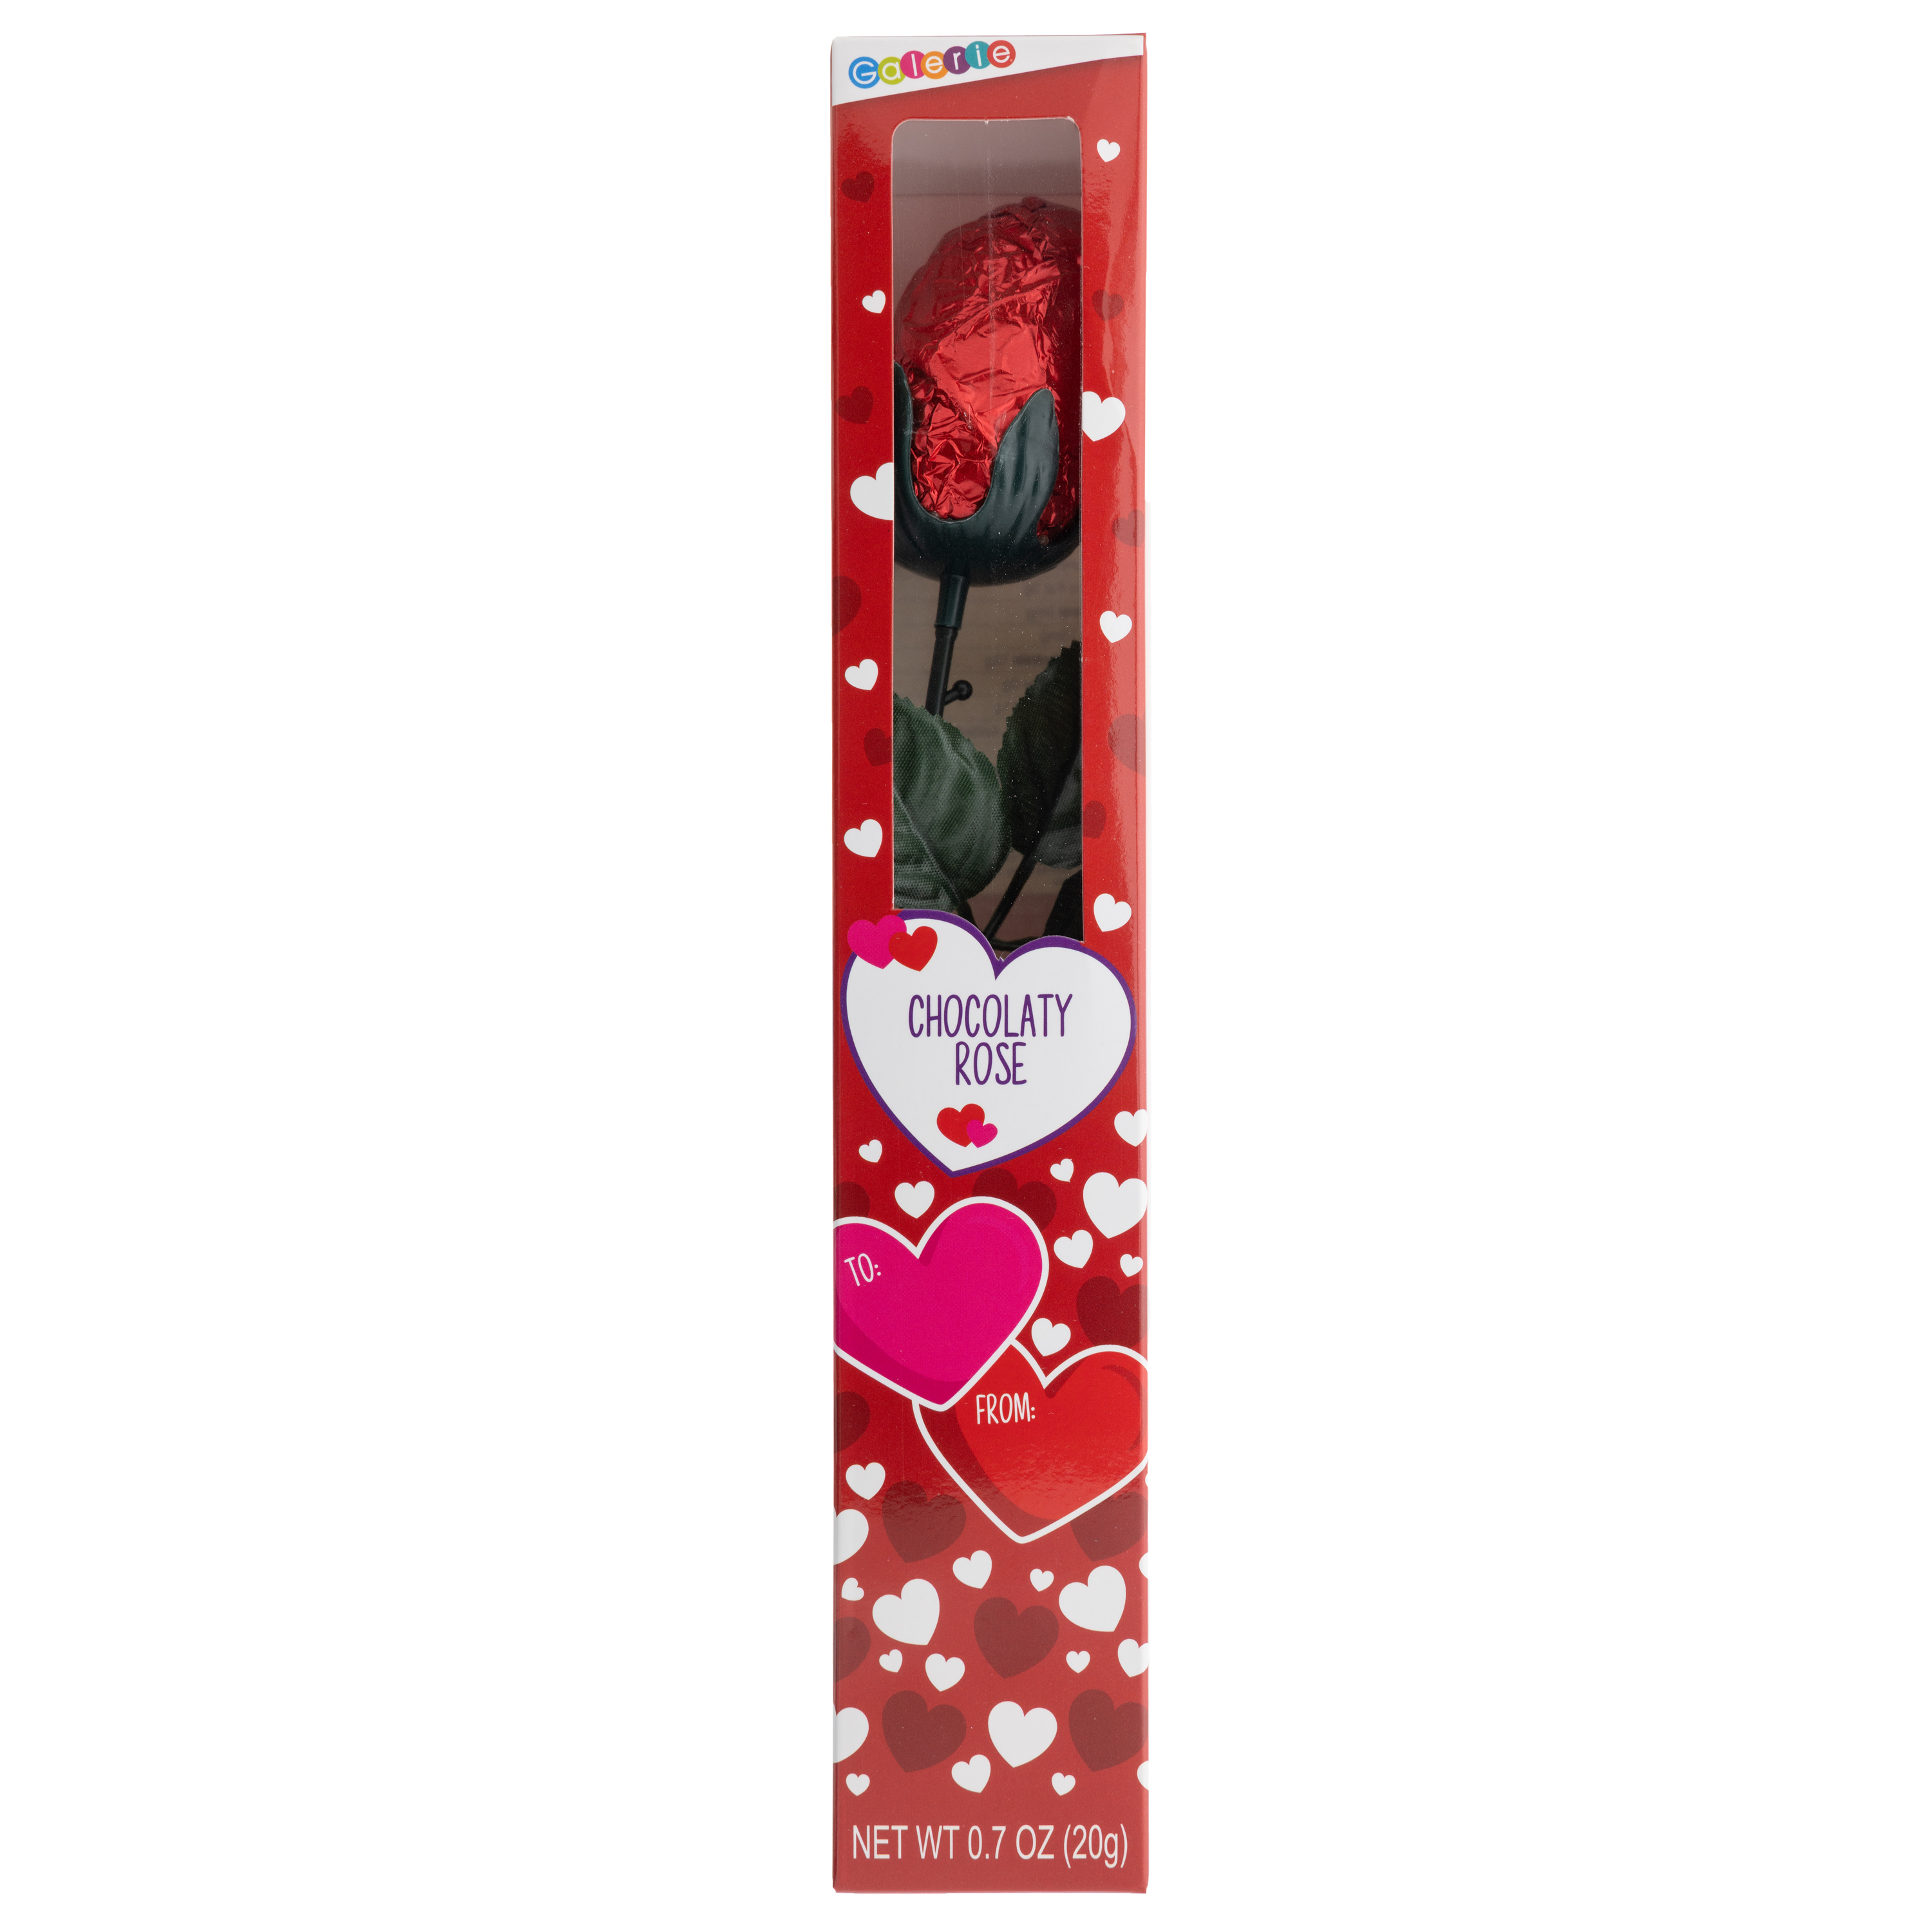 Galerie Valentine's Day Foil Wrapped Chocolaty Rose in Box, 0.7 oz (20g) - image 1 of 6